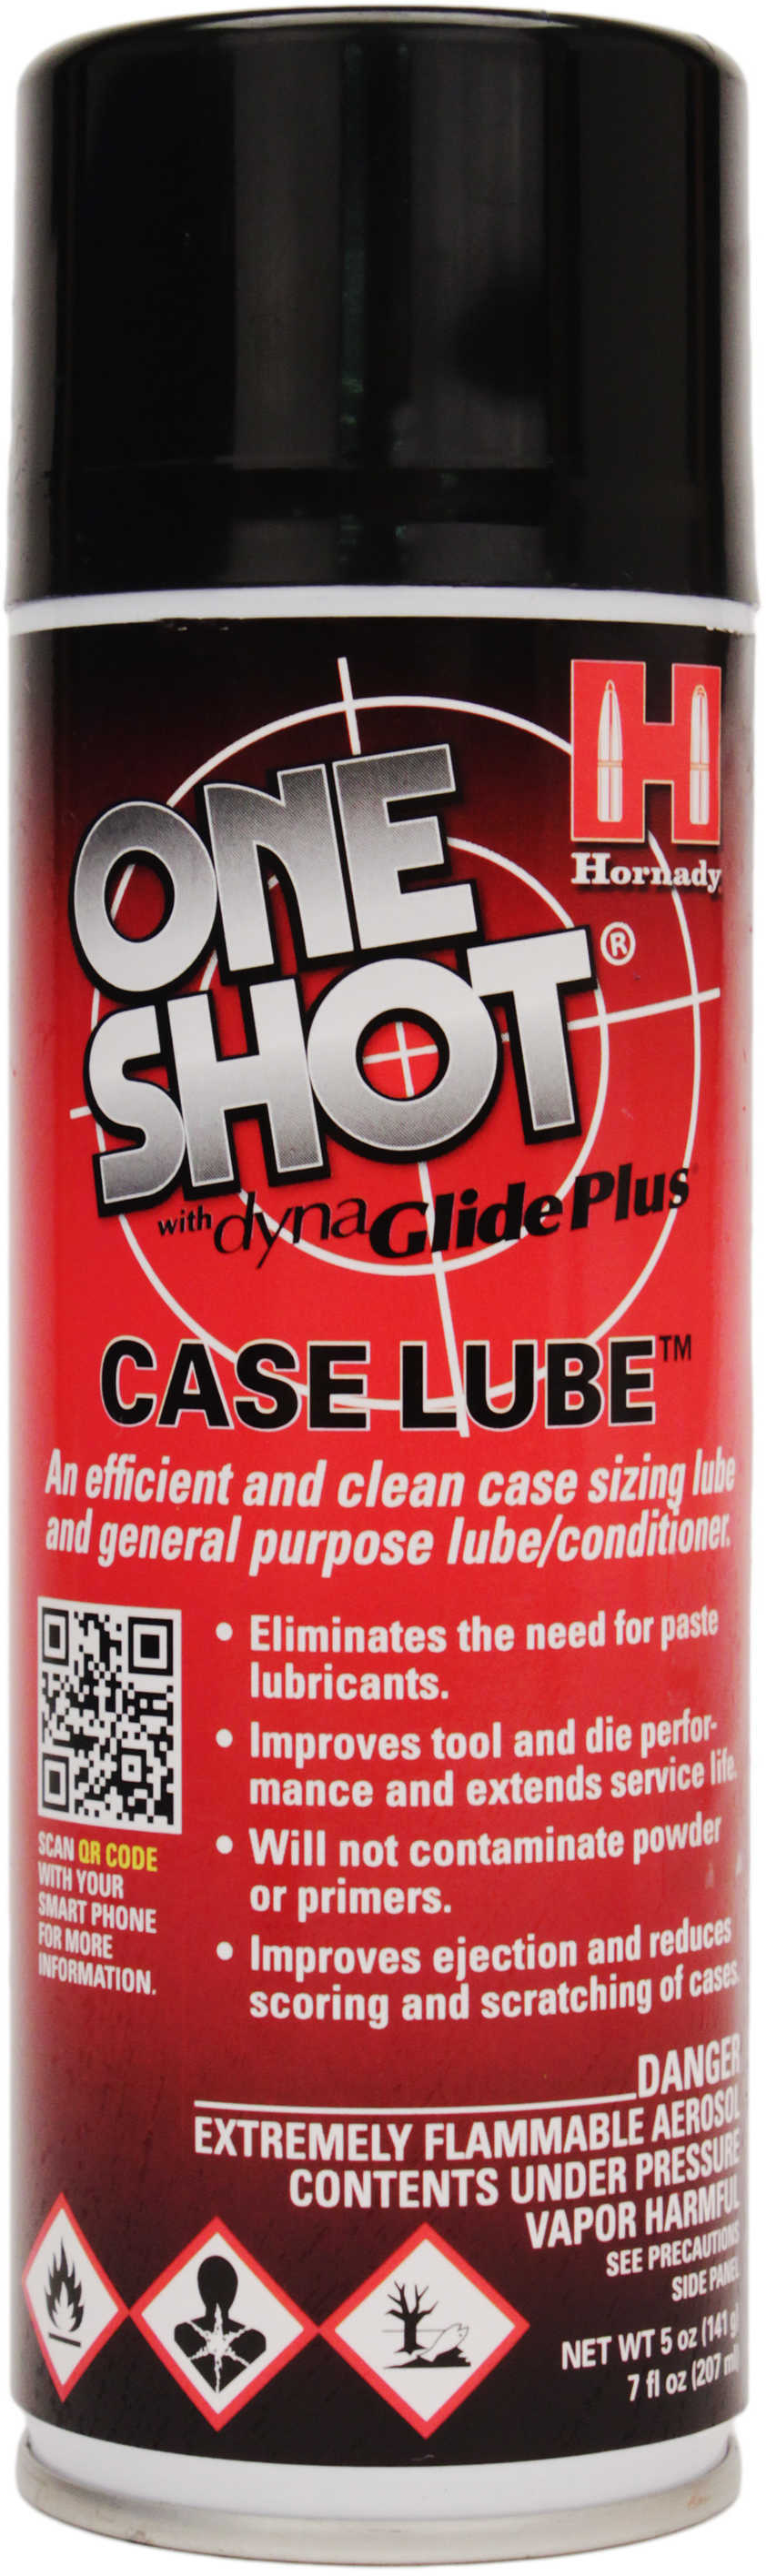 Hornady Case Lube Md: 9991